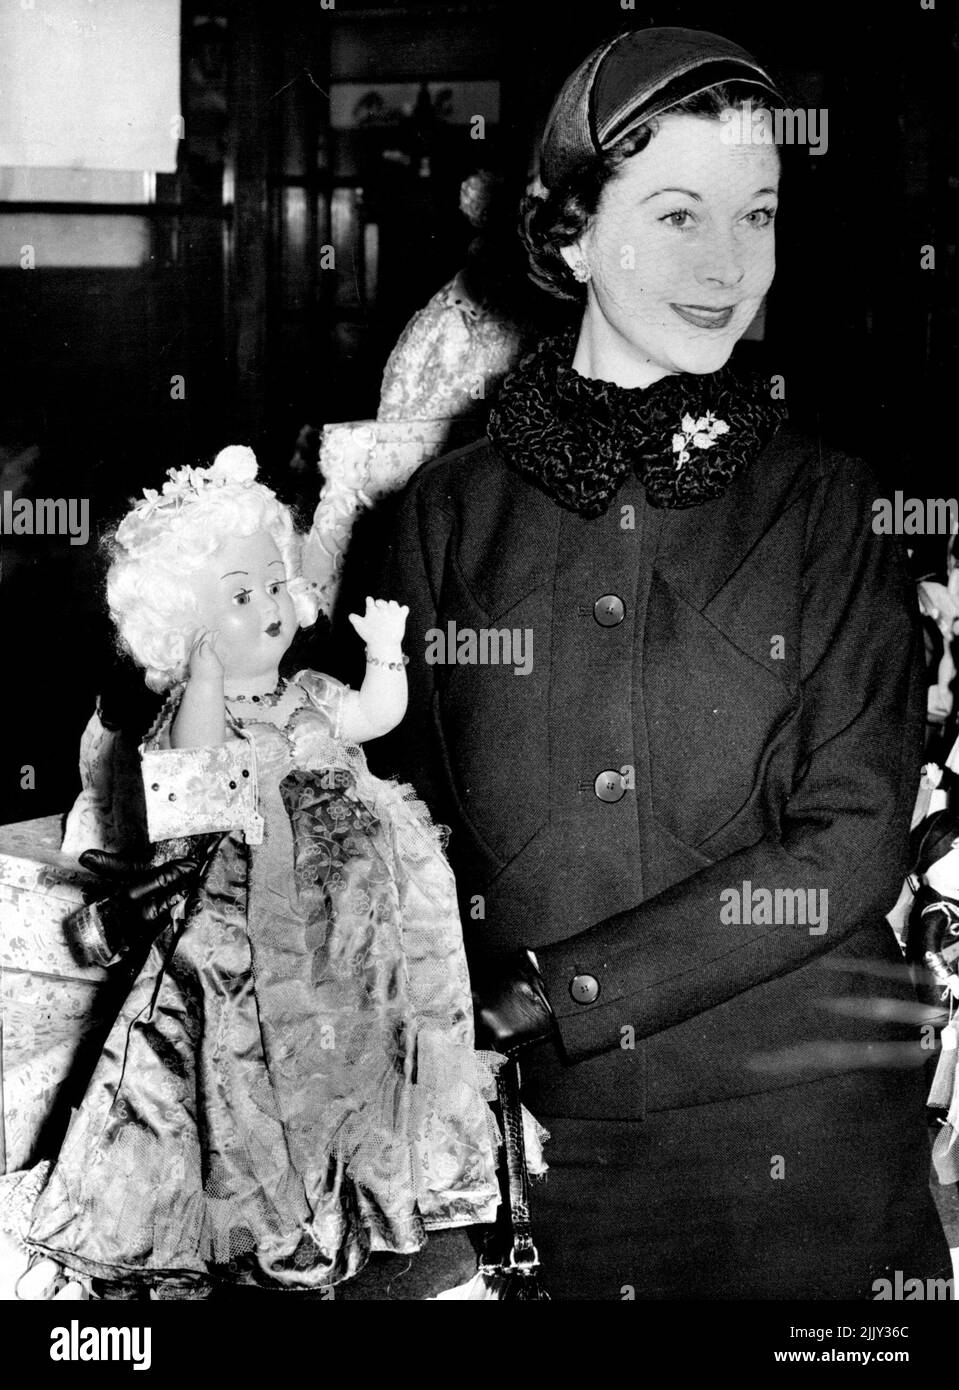 Vivien Leigh Opens Cancer Gift Shop - Vivien Leigh with the lovely doll. Vivien Leigh (Lady Olivier) opened the cancer relief fund publicity depot and gift shop in Oxford street, London, today. Particular interest was shown by Lady Olivier in this attractive doll which can be connected to a radio so that the sound comes from a tiny loud speaker fitted in the doll. All proceeds of sales from this gift shop will be given to victims of cancer. November 10, 1954. (Photo by Paul Popper, Paul Popper Ltd.). Stock Photo